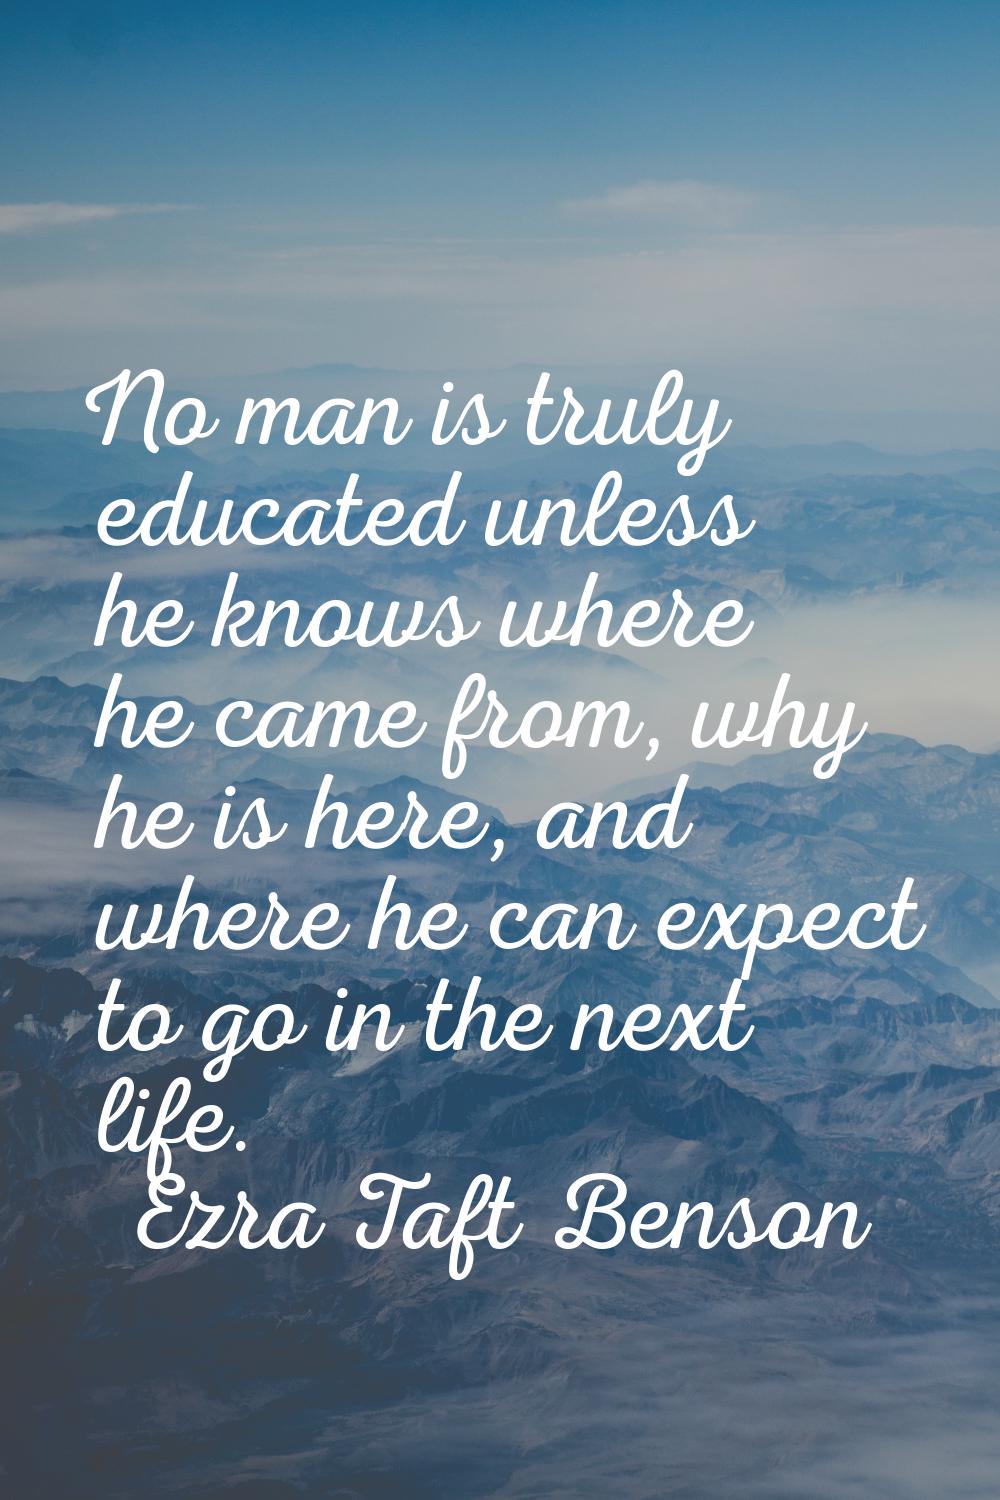 No man is truly educated unless he knows where he came from, why he is here, and where he can expec